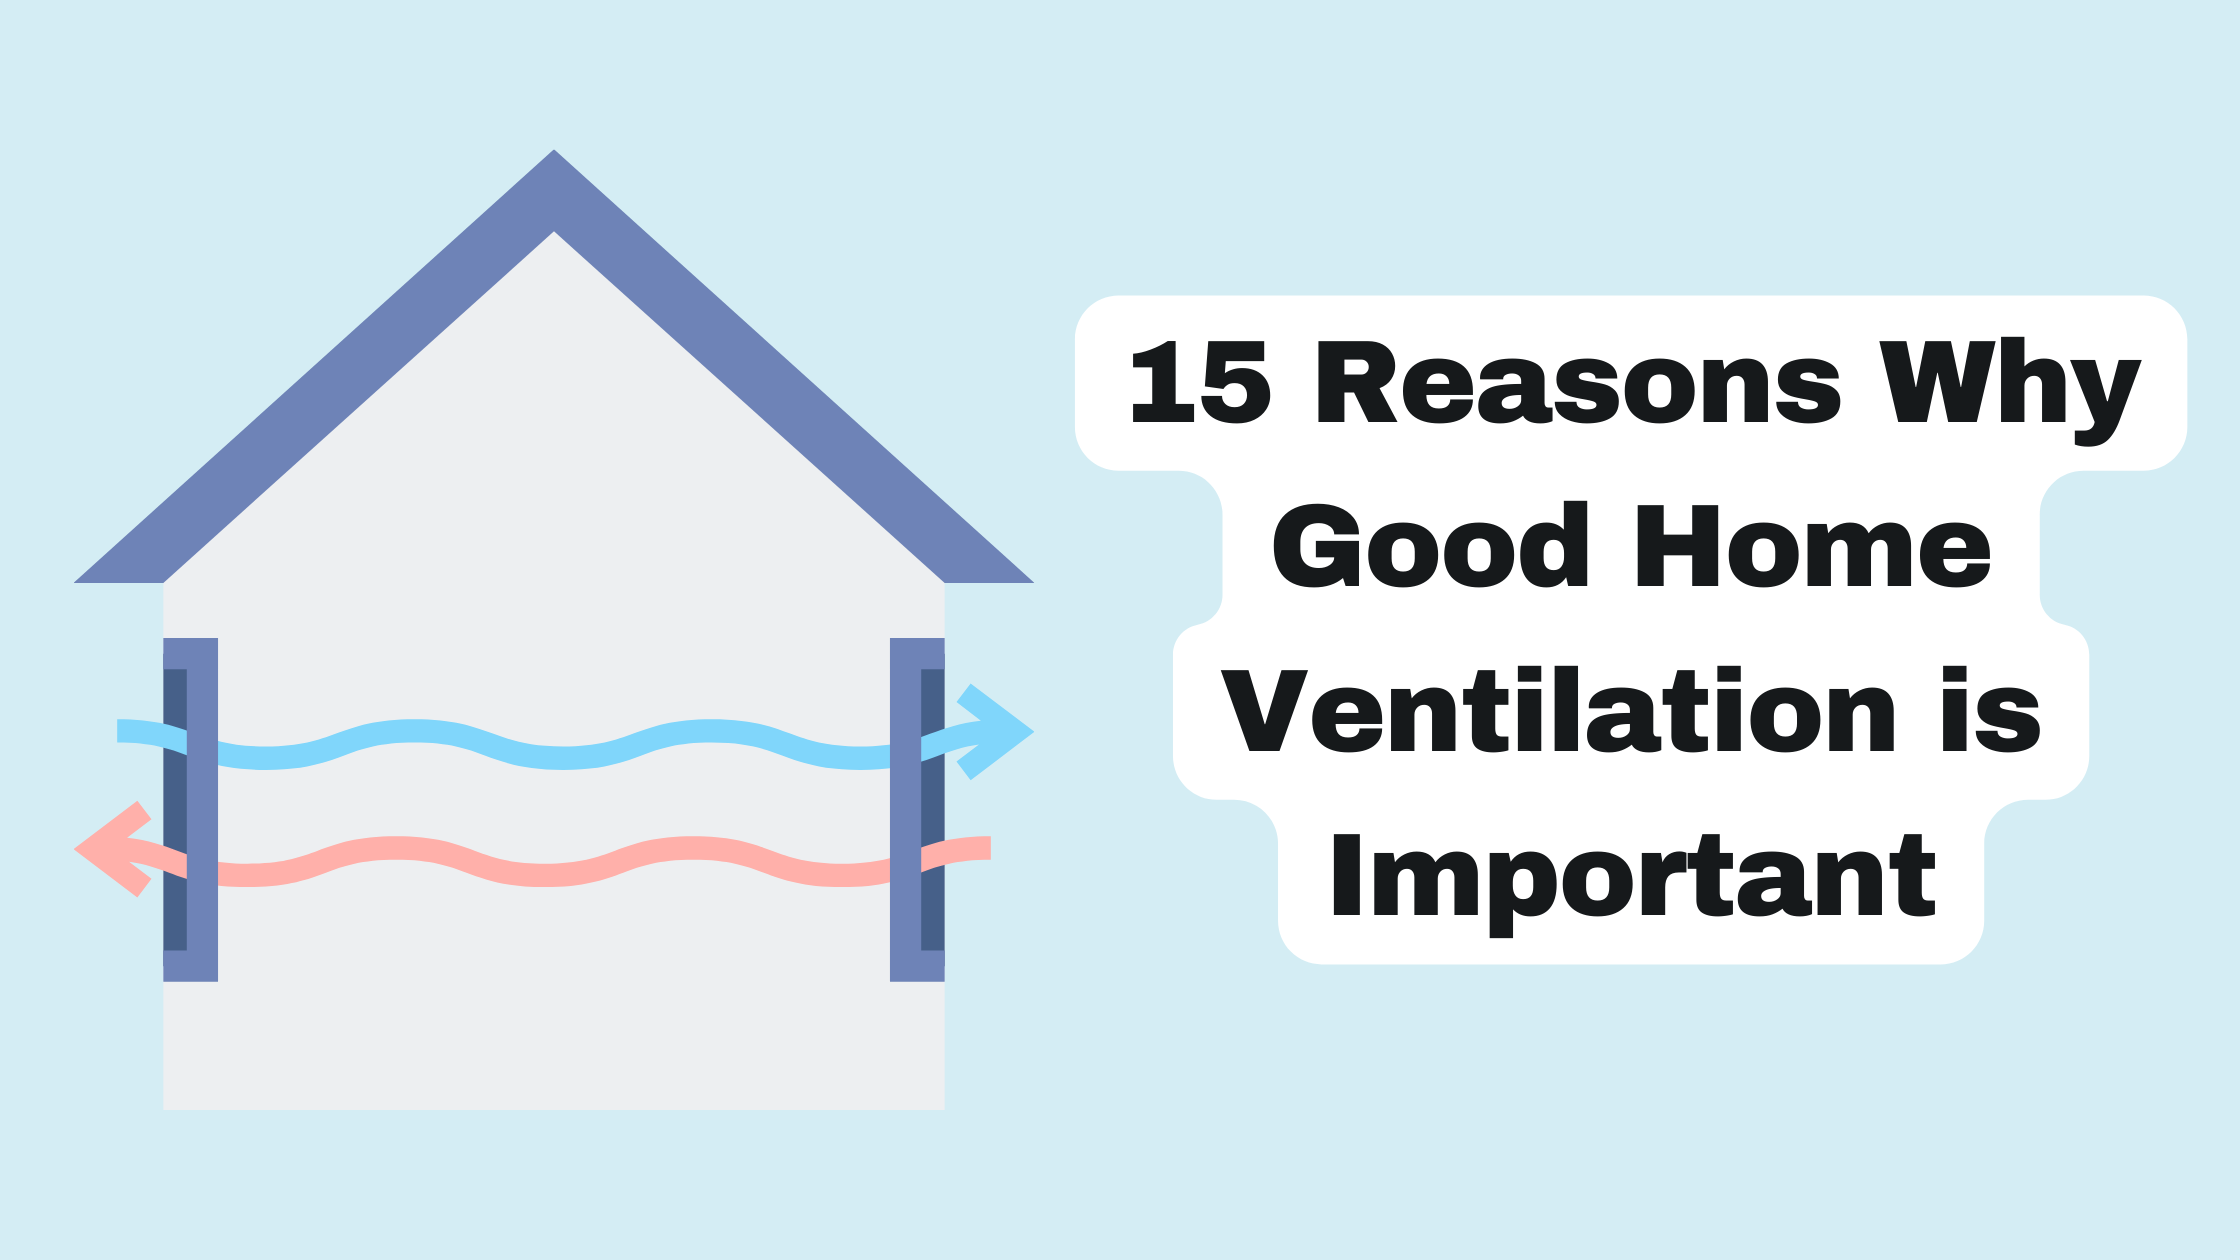 Reasons Why Good Home Ventilation is Important